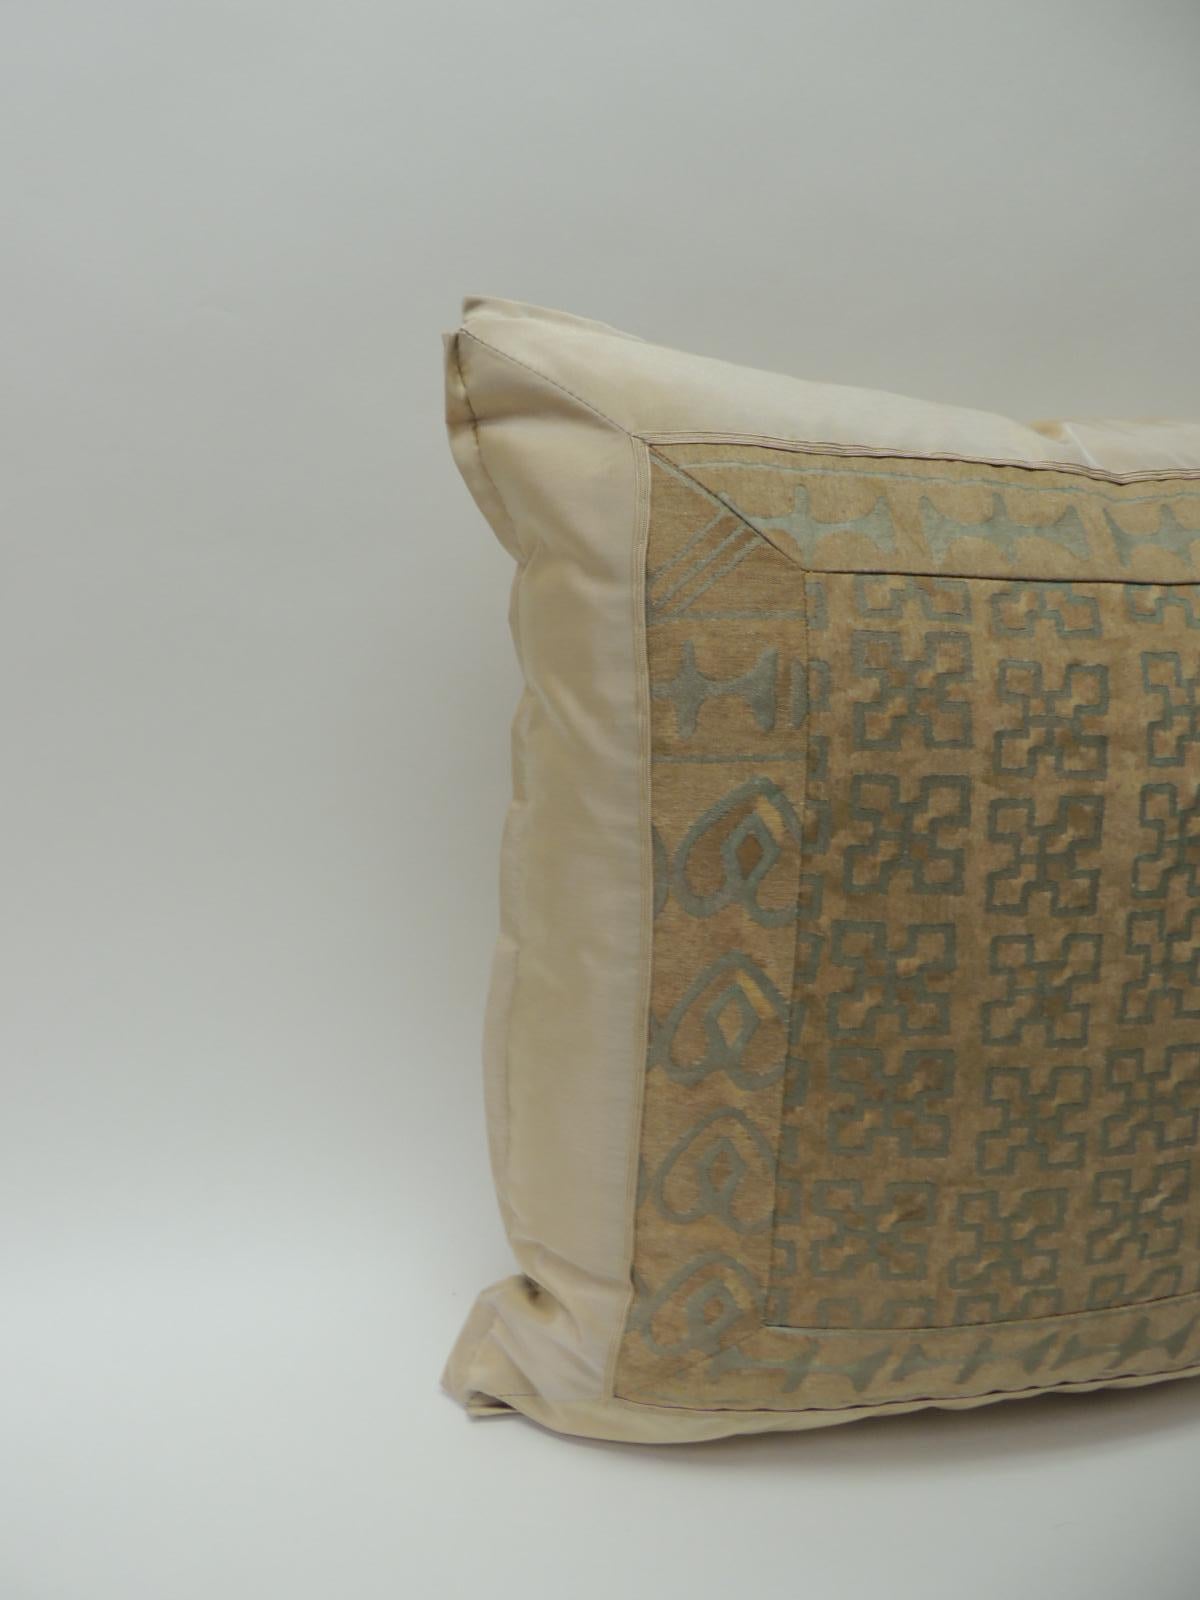 Vintage fortuny “Ashanti” copper on silver square decorative pillow handcrafted in a patchwork decorative style. Pillow framed with ecru silk and ATG custom flat silk trim all around and same silk backing. Decorative pillow handmade with a fortuny